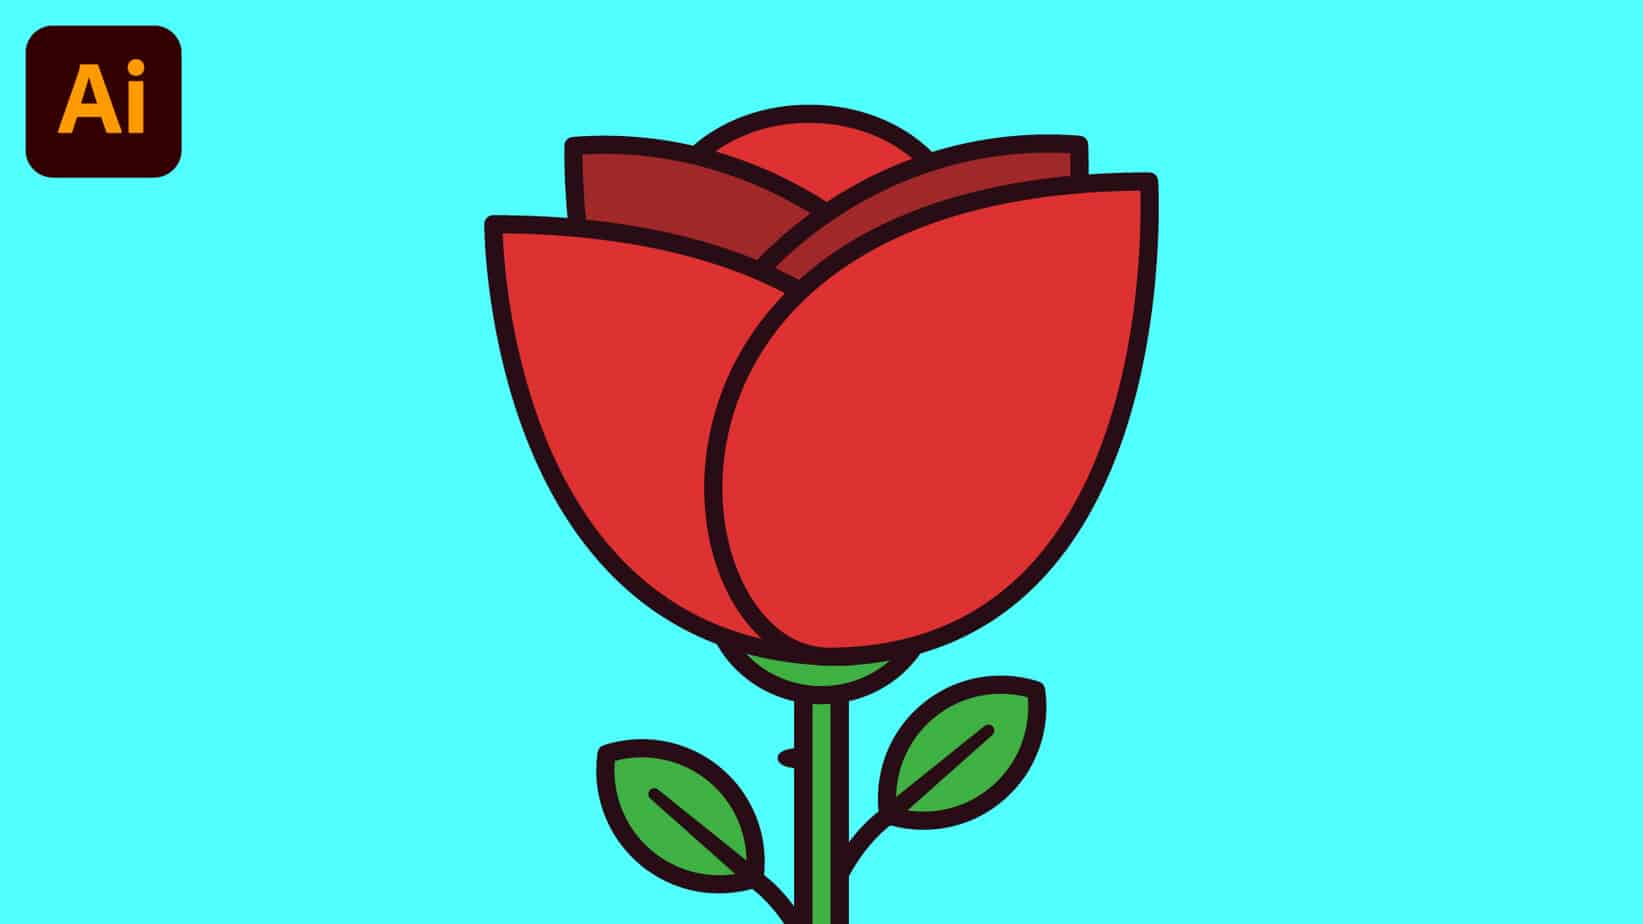 How to Draw a Rose in Illustrator